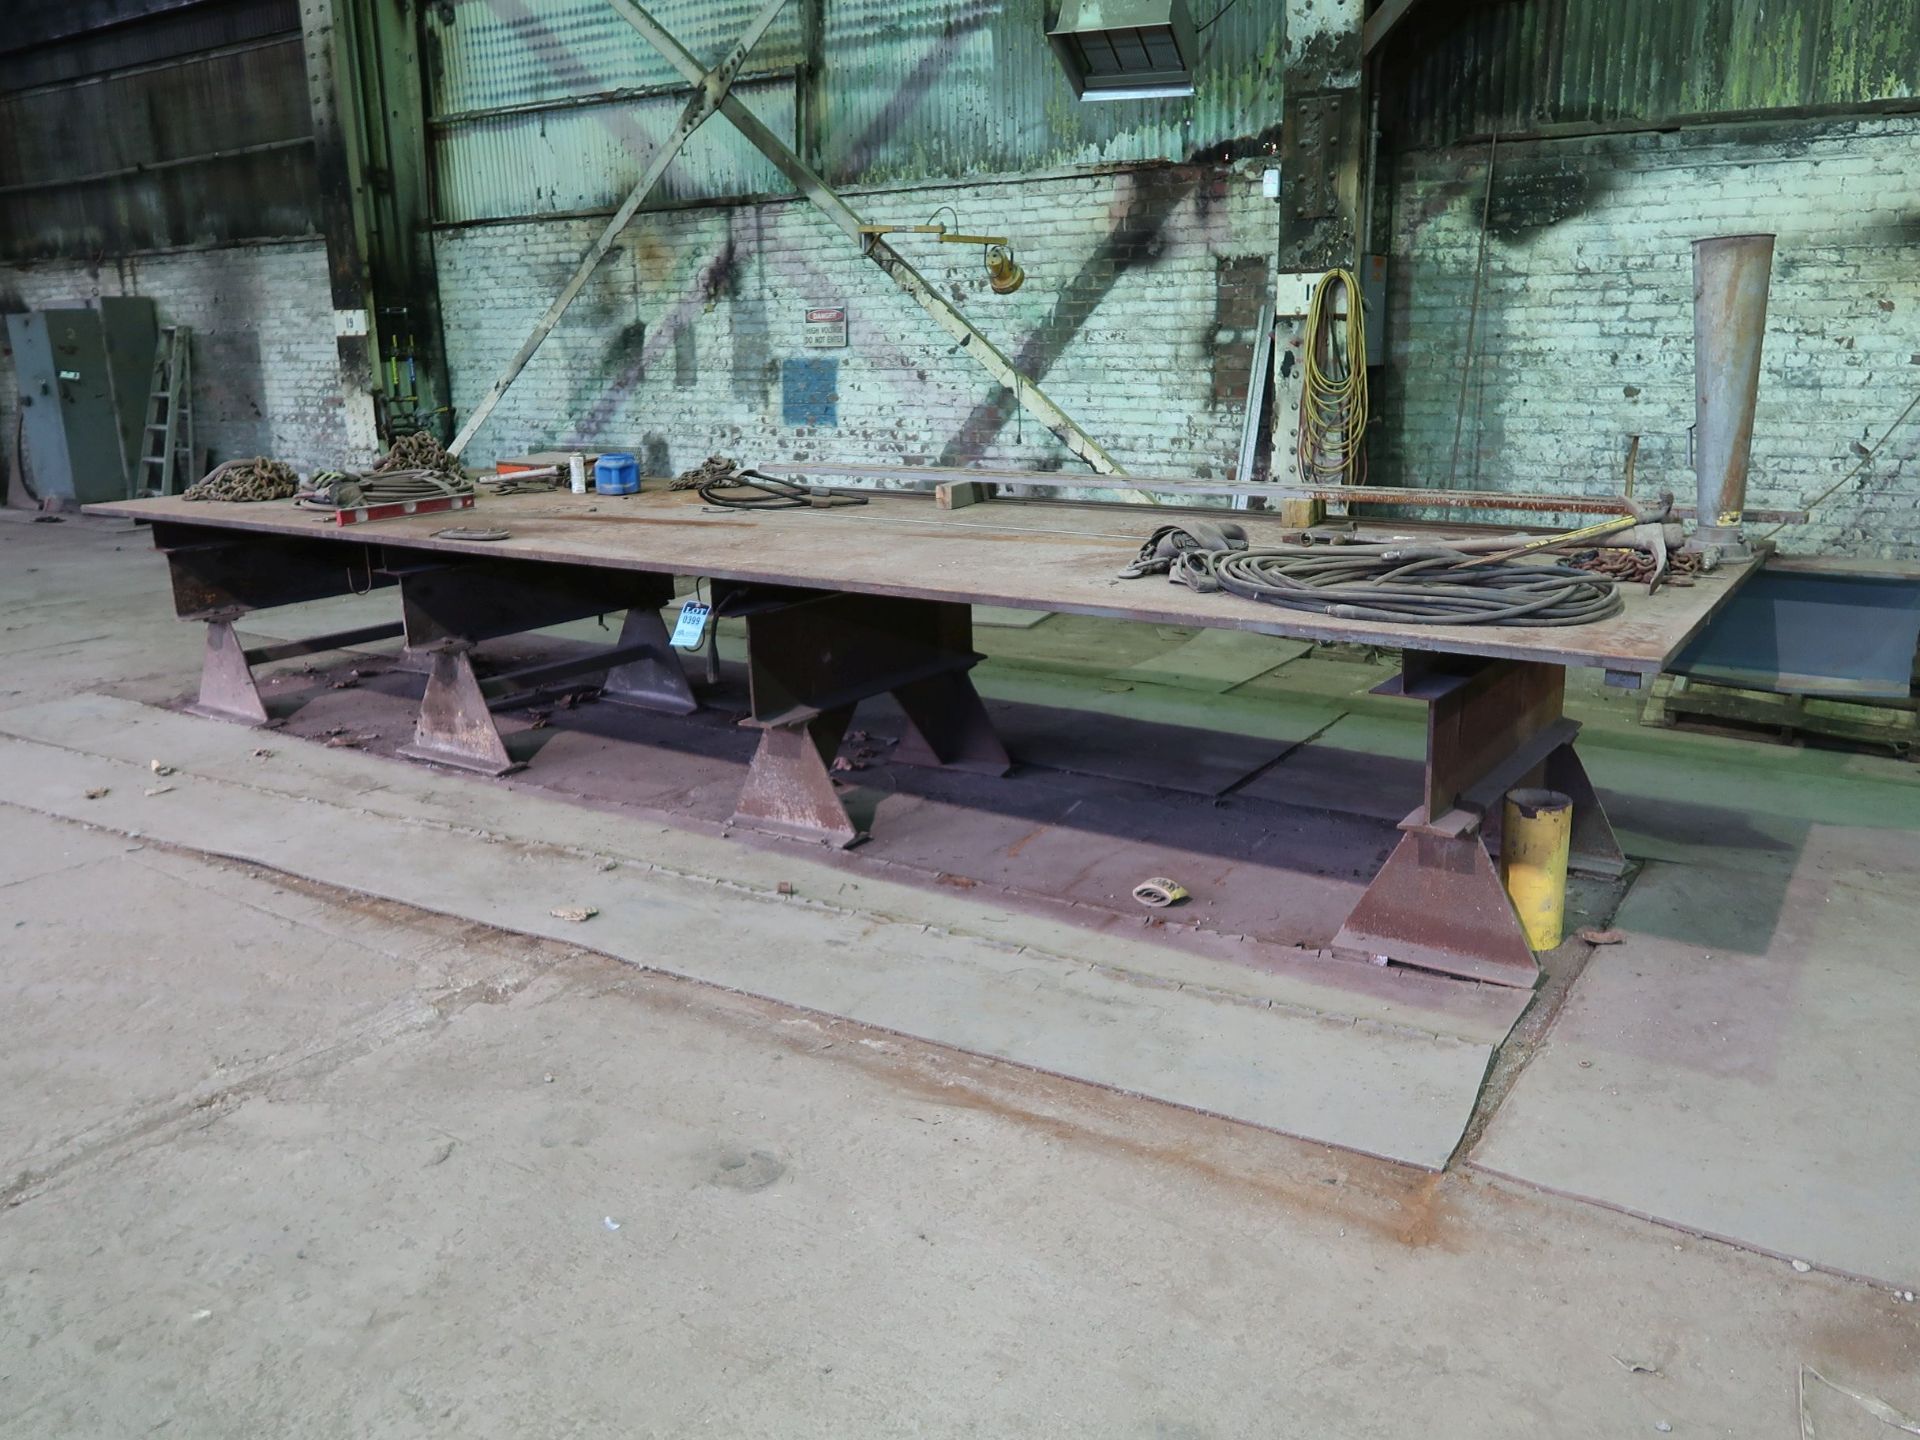 6' X 20' X 1" THICK TOP HD WELDING TABLE WITH CONTENTS (NO SHEAR BLADES)